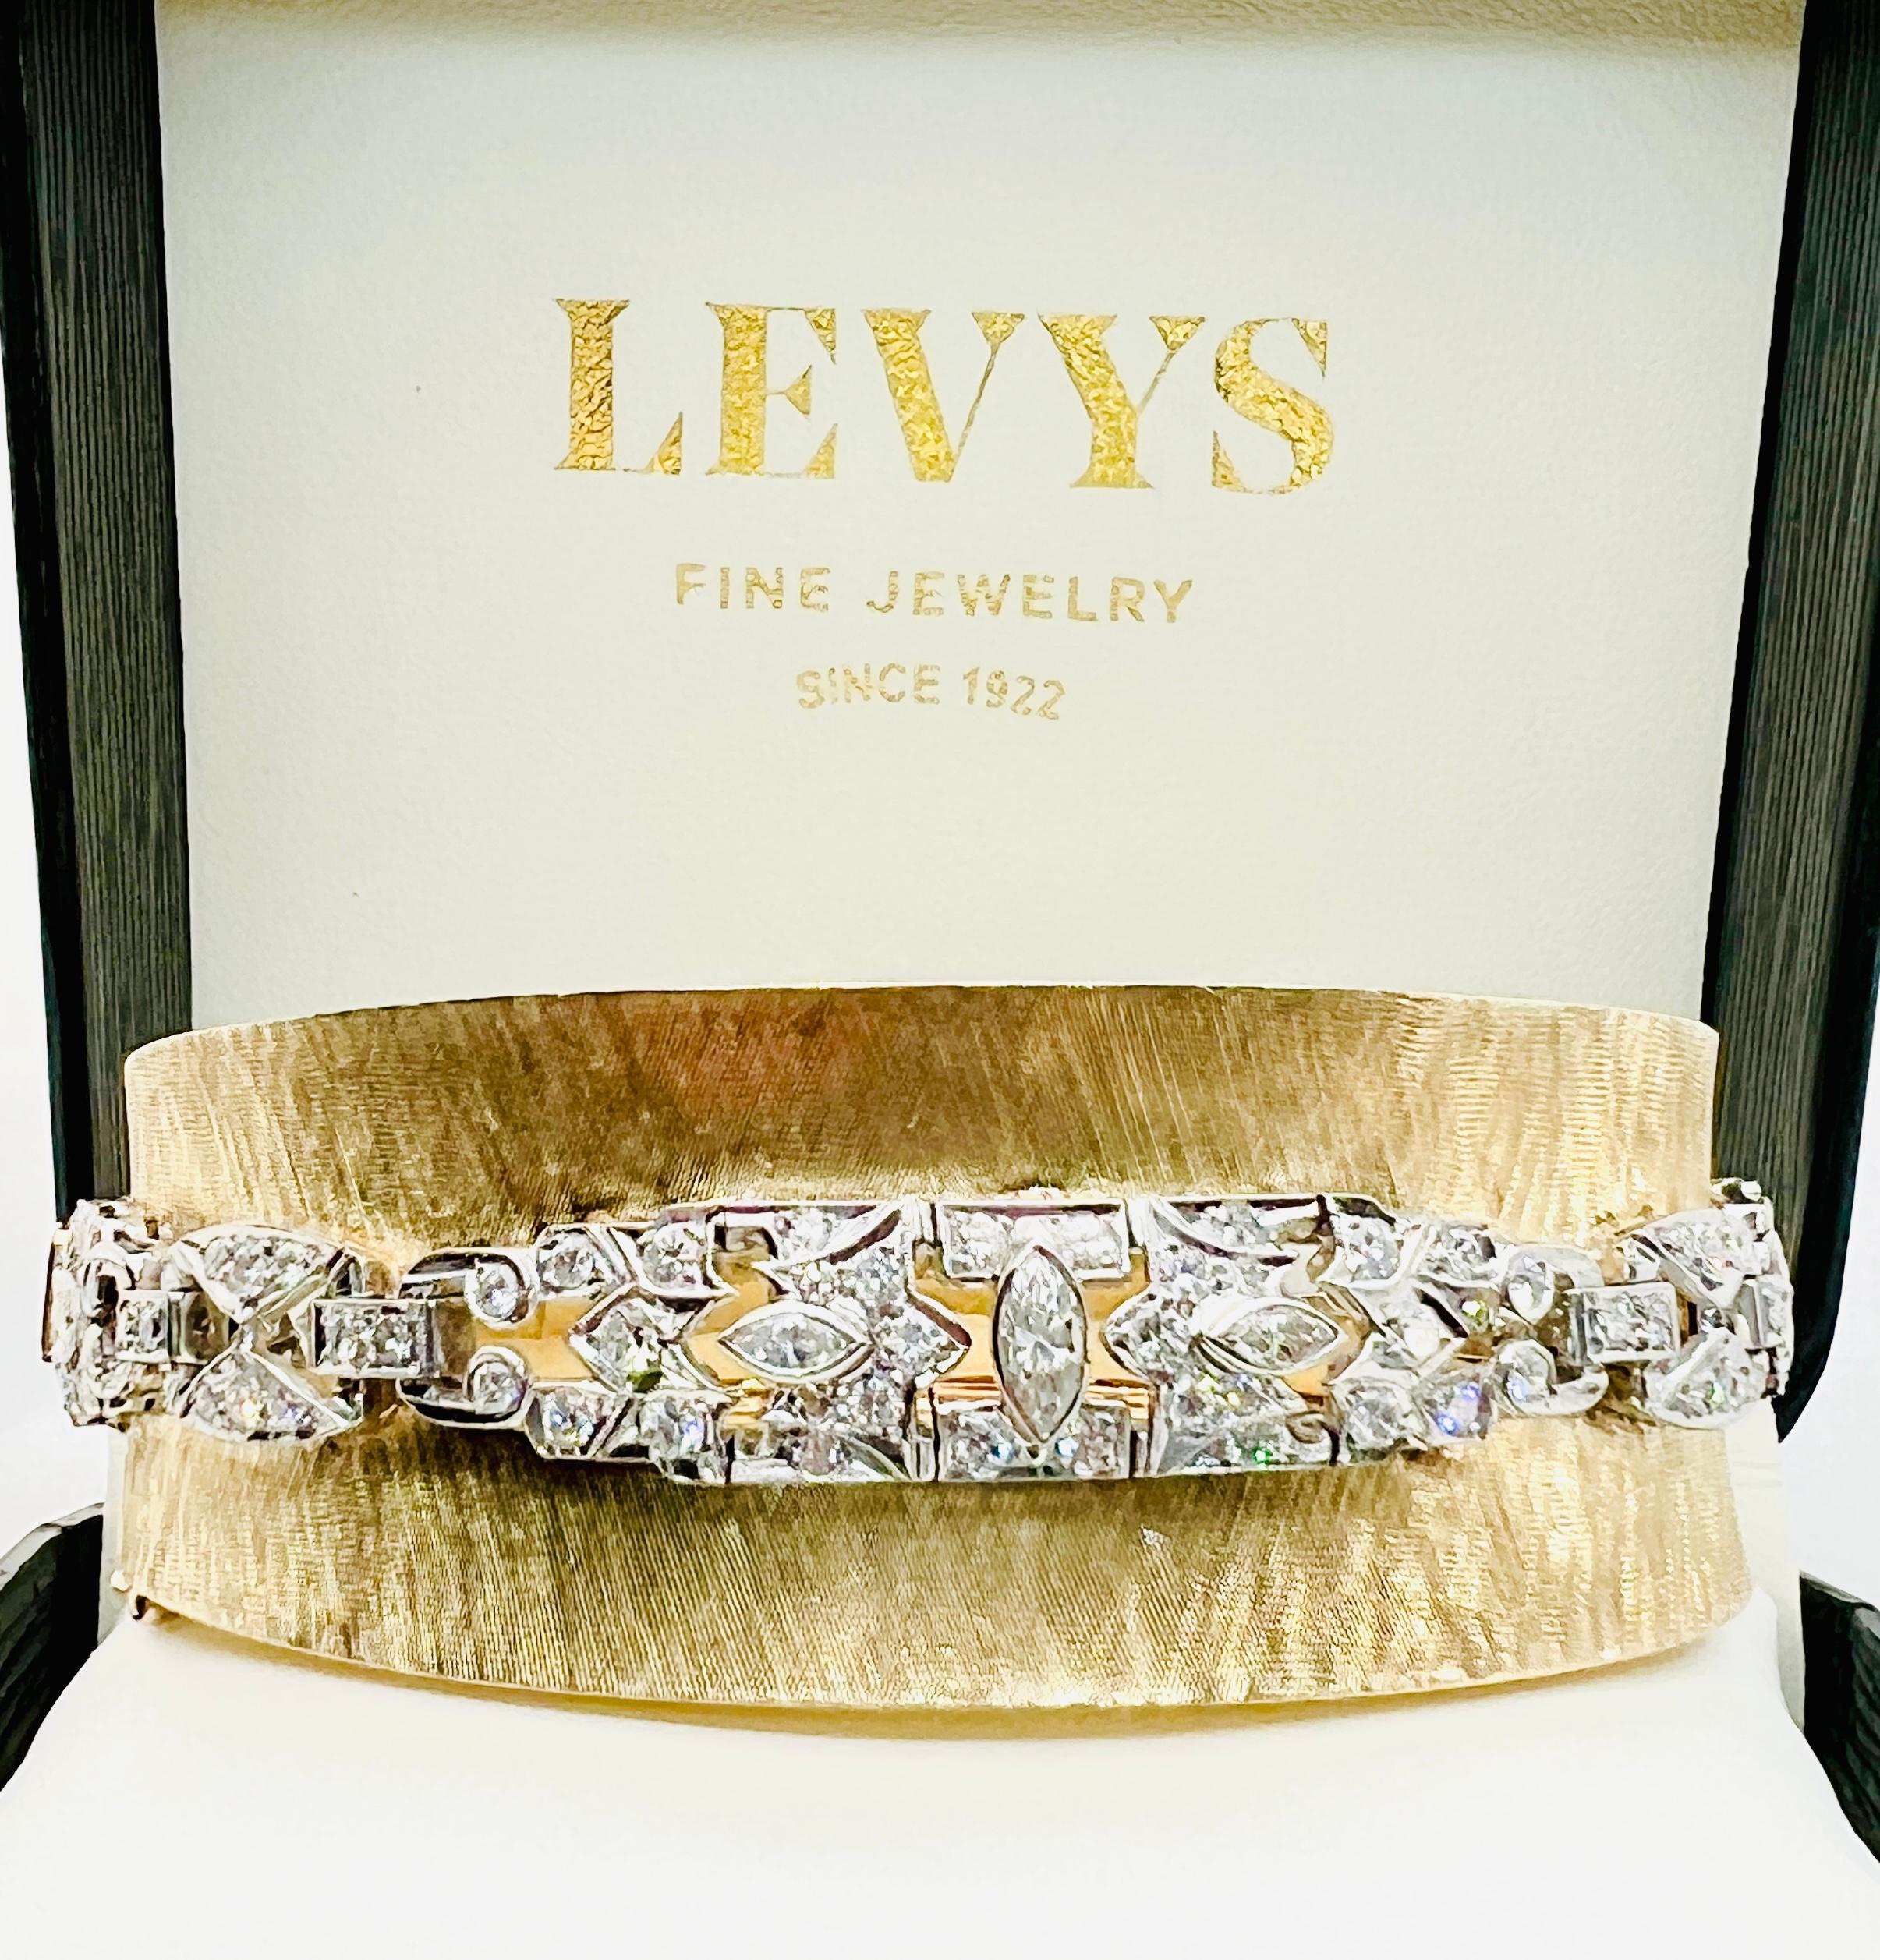 This is such a phenomenal bracelet! Made in 14K yellow gold with beautiful etching. The bangle has a slight concave shape to it. Along the mid section of the bangle is a stunning row of diamonds that are set in platinum. There are 118 round and 9